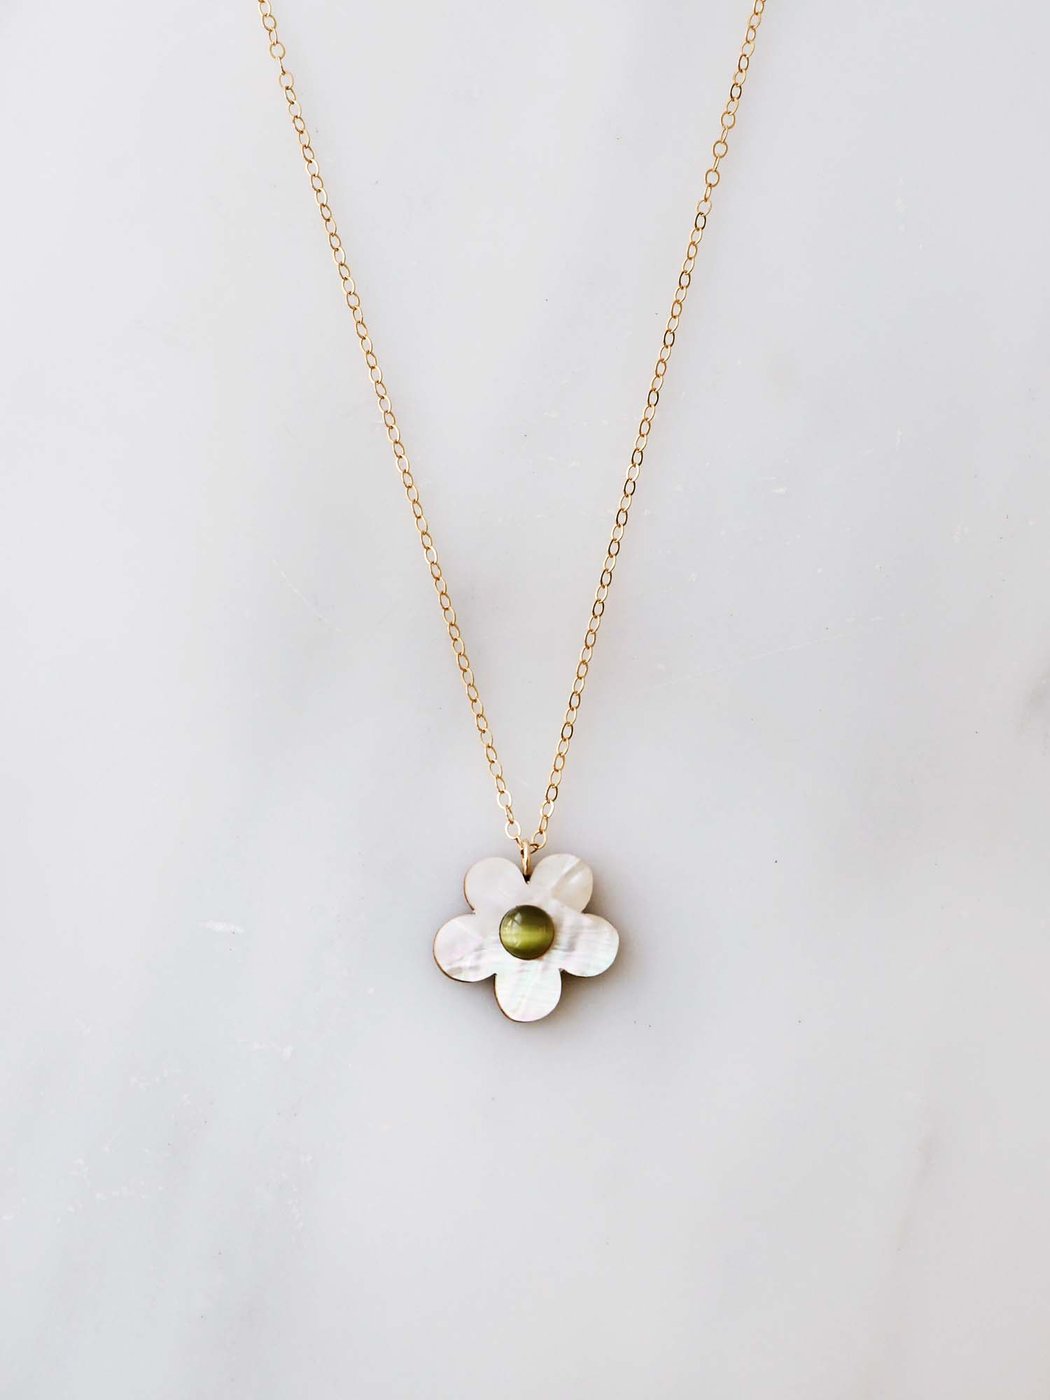 Mini Bloom Necklace in White Pearl on 14k gold-filled chain - Lifestory - Wolf & Moon